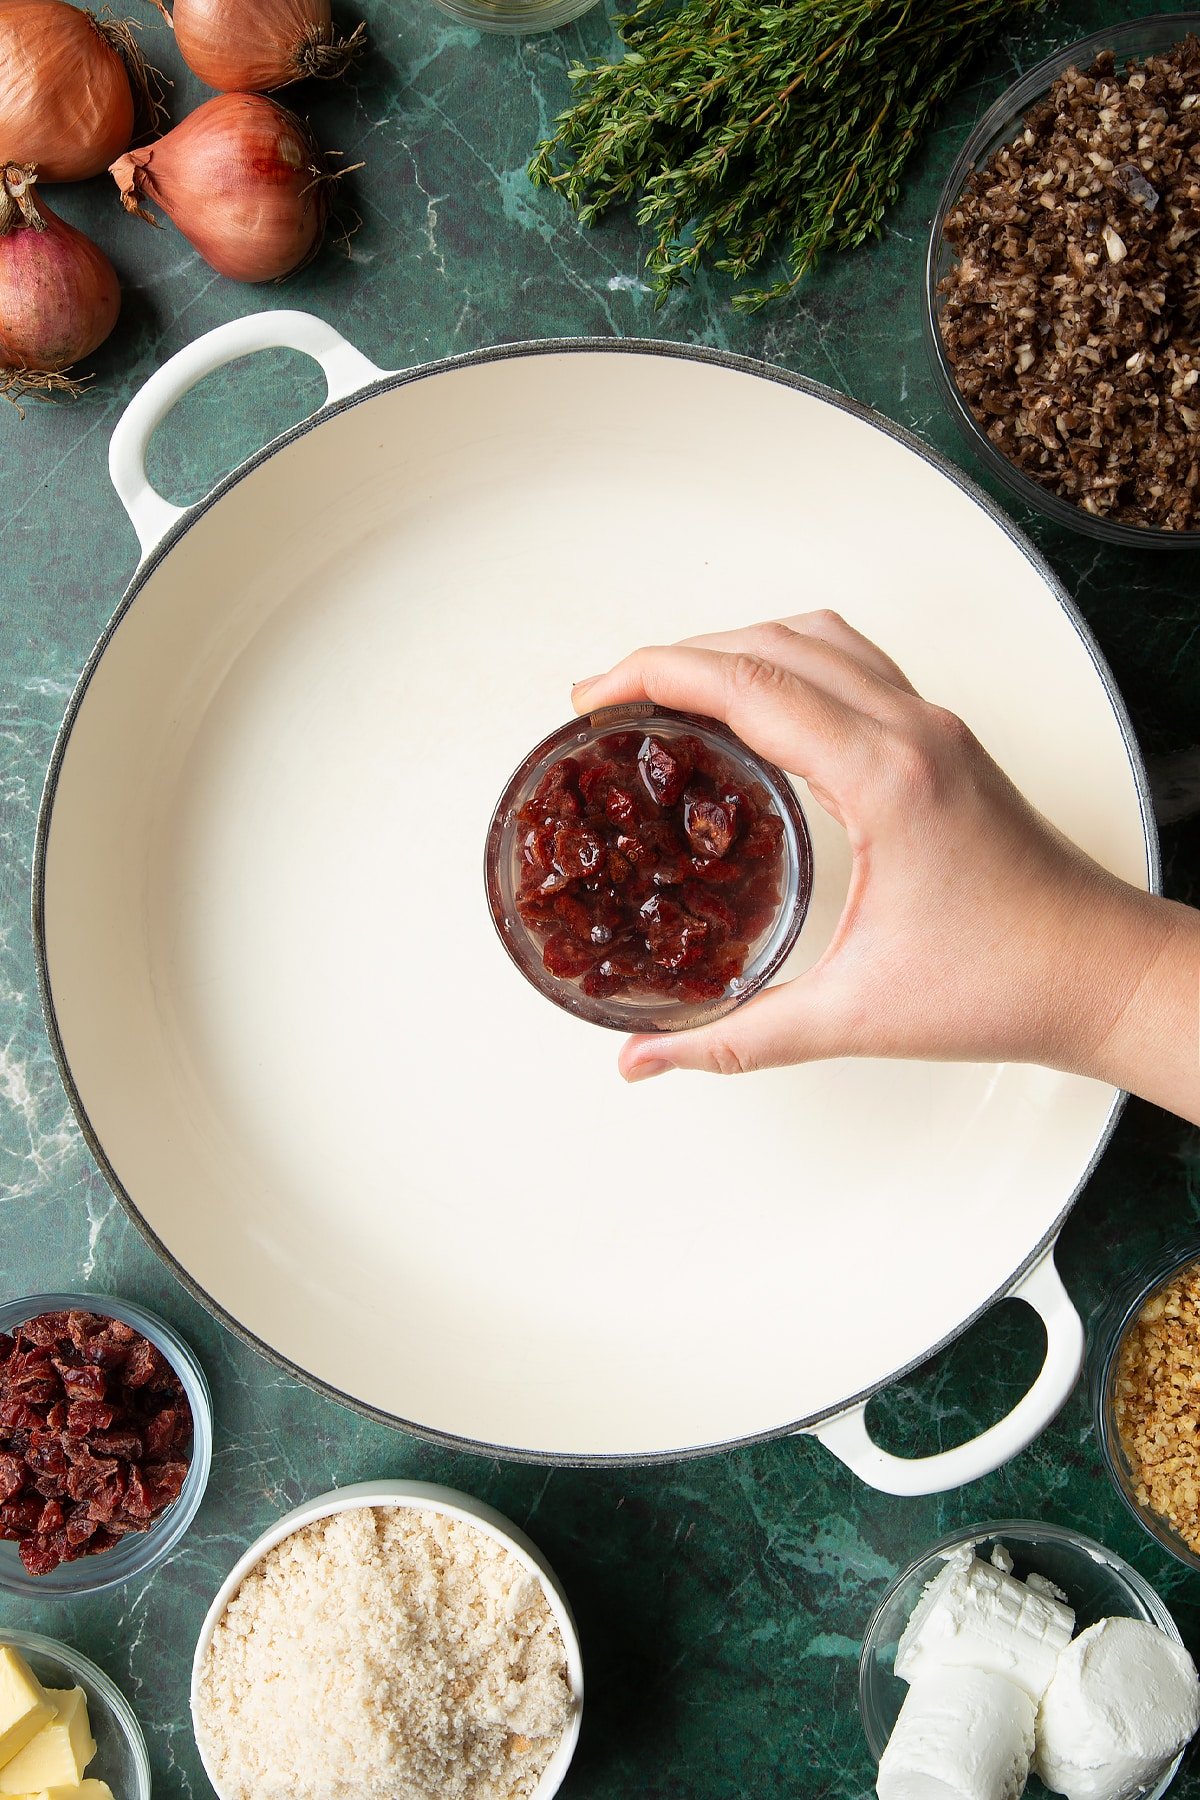 Overhead shot of a hand holding a bowl of cranberries above a large pan